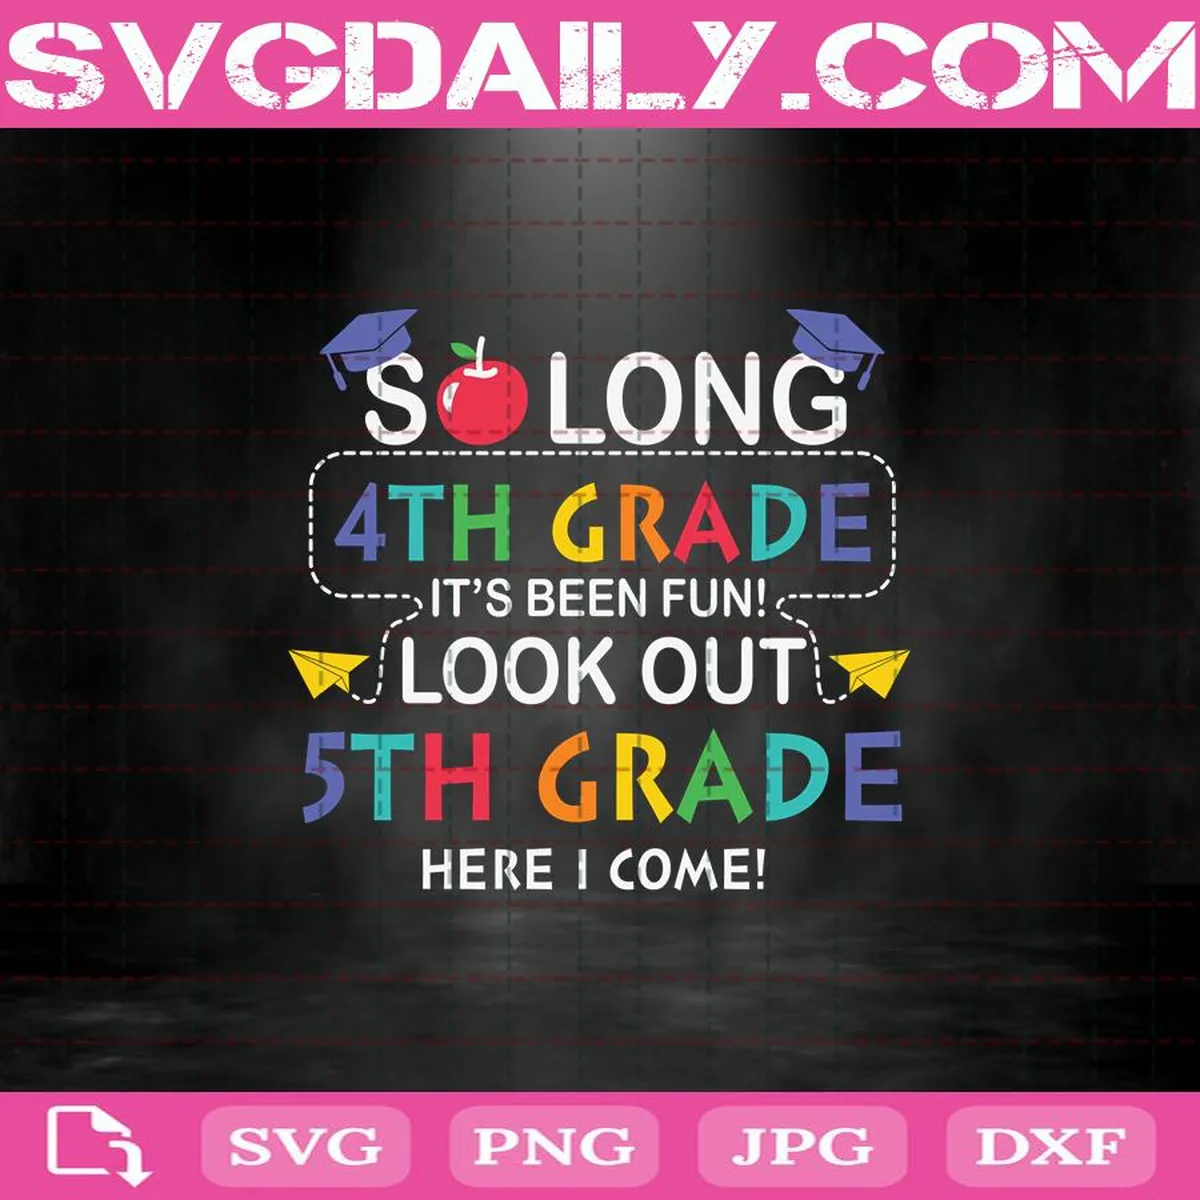 So Long 4th Grade It's Been Fun Look Out 5th Grade Here I Come Svg, 4th Grade Svg, 5th Grade Svg, Graduate Svg